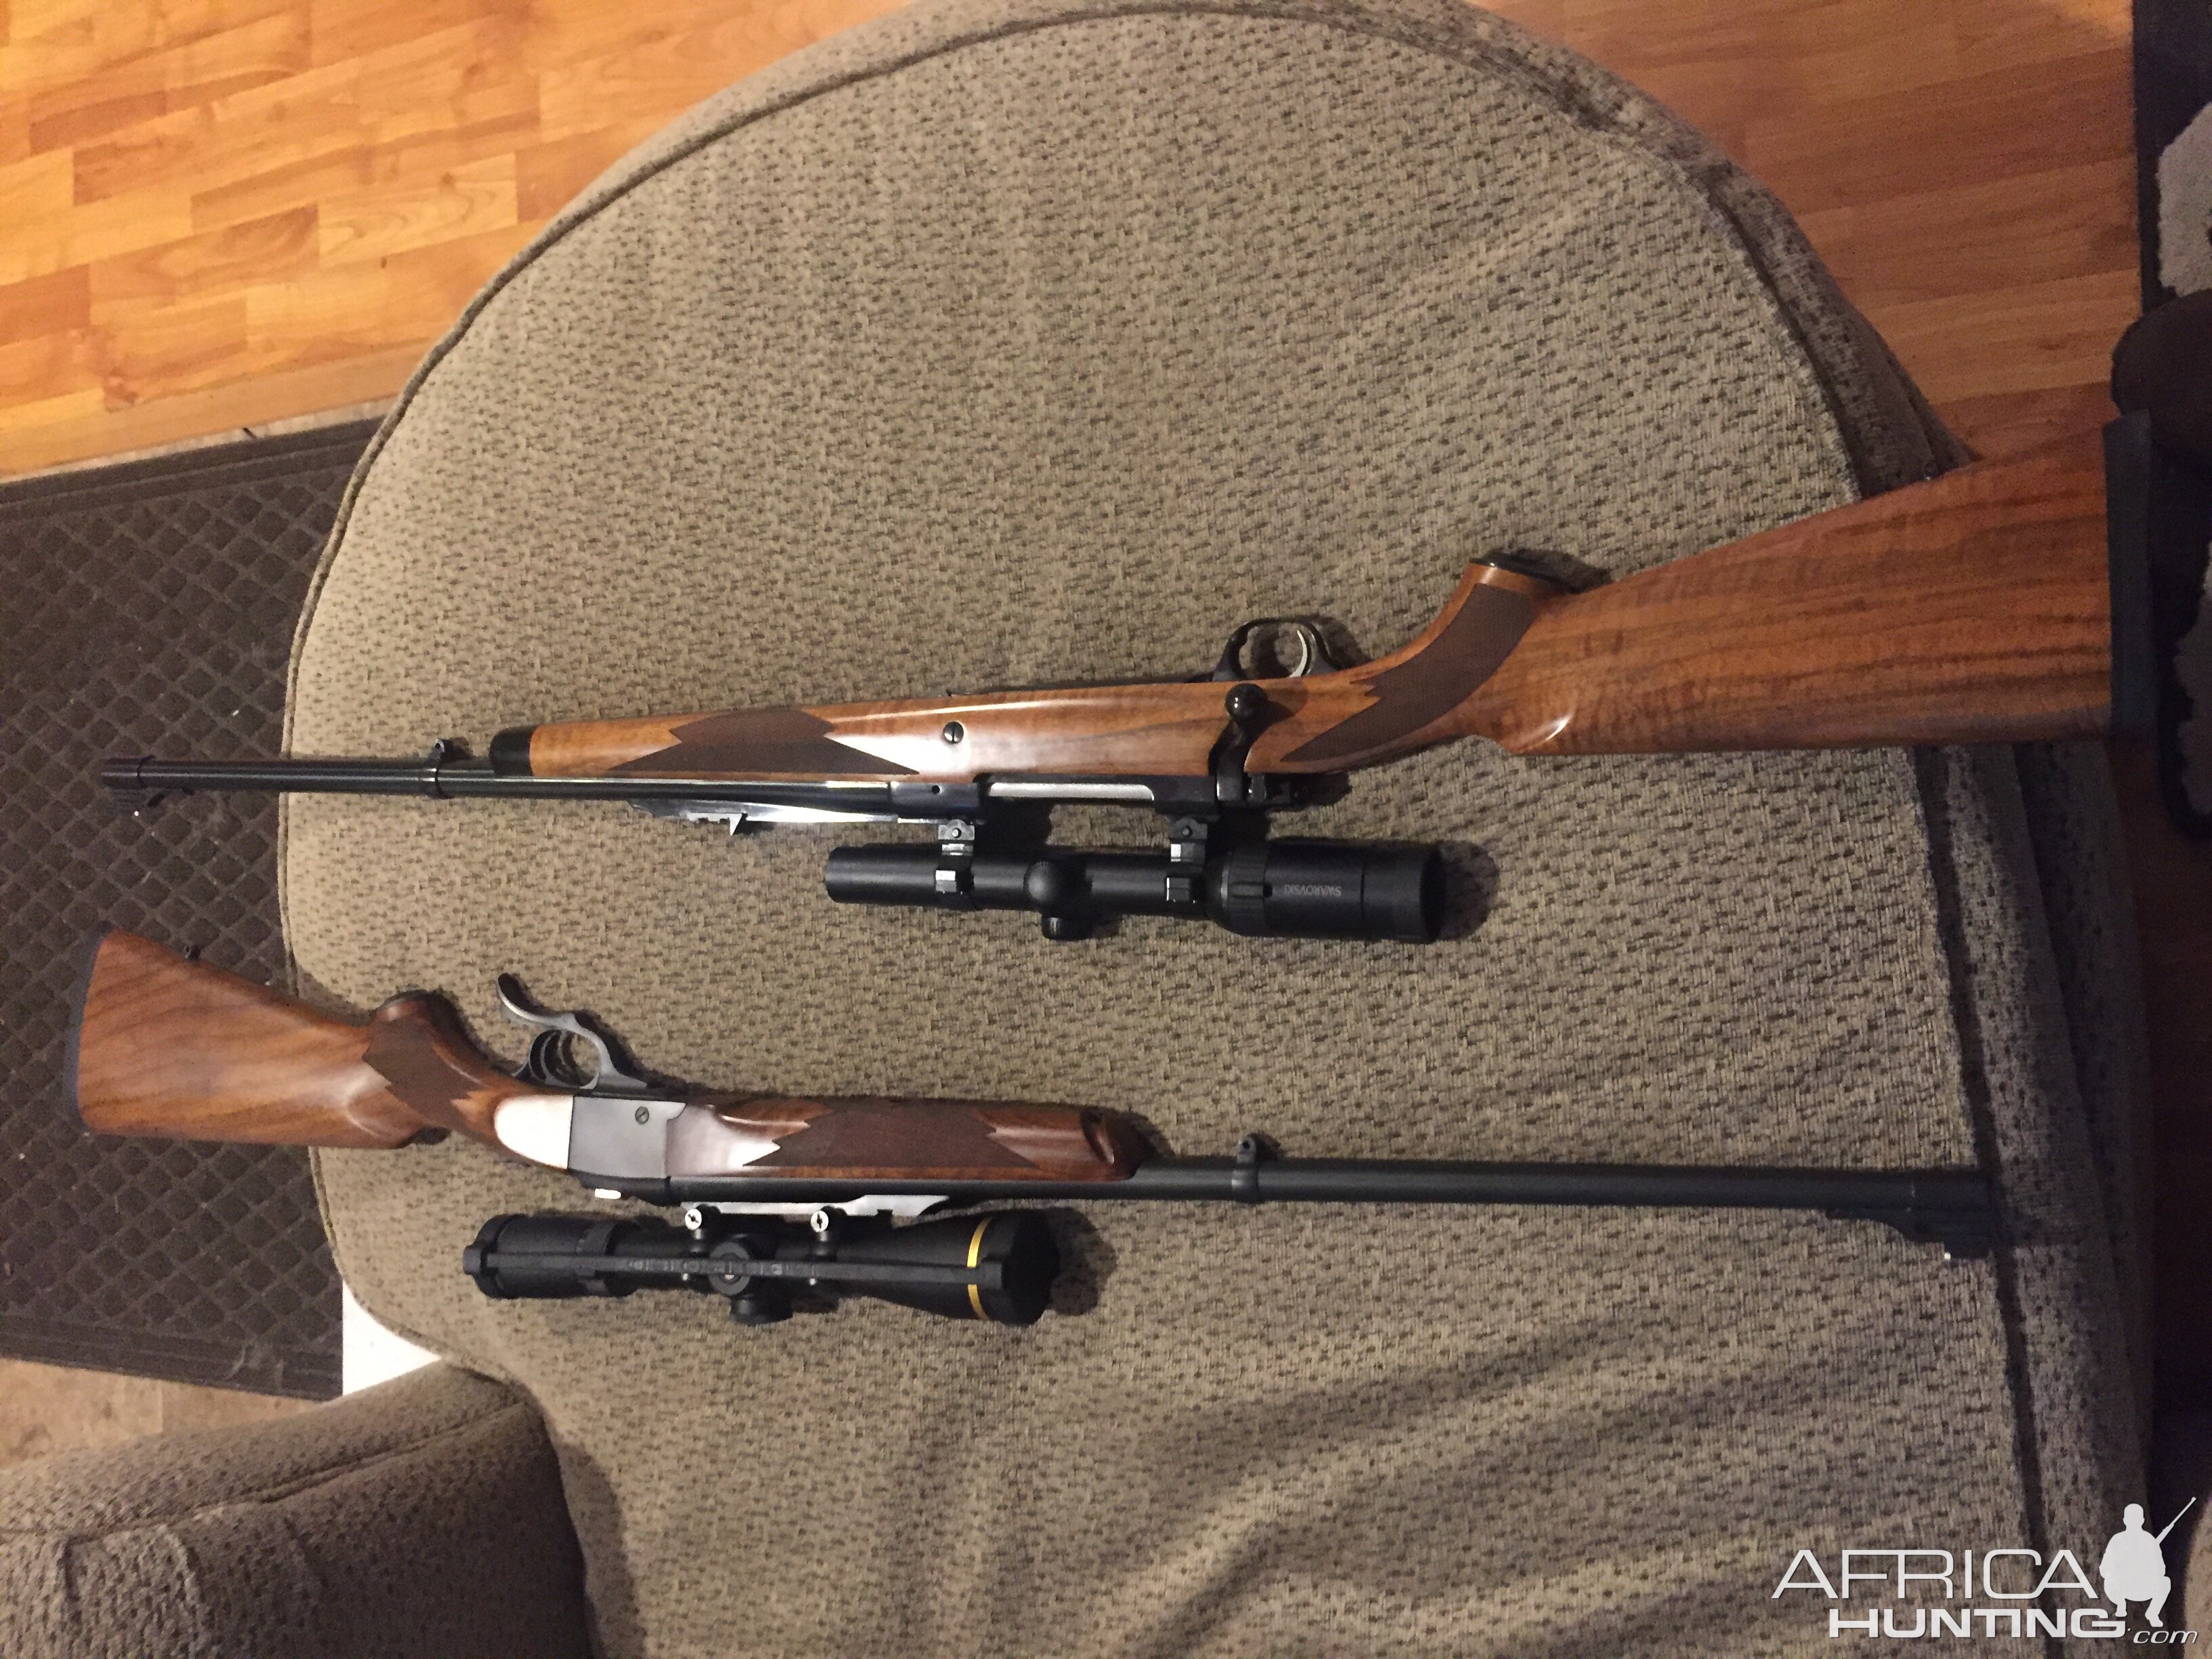 CB Kudu Ruger No 1 in 300 H&H Rifle & Ruger RSM in 416 Rigby Rifle